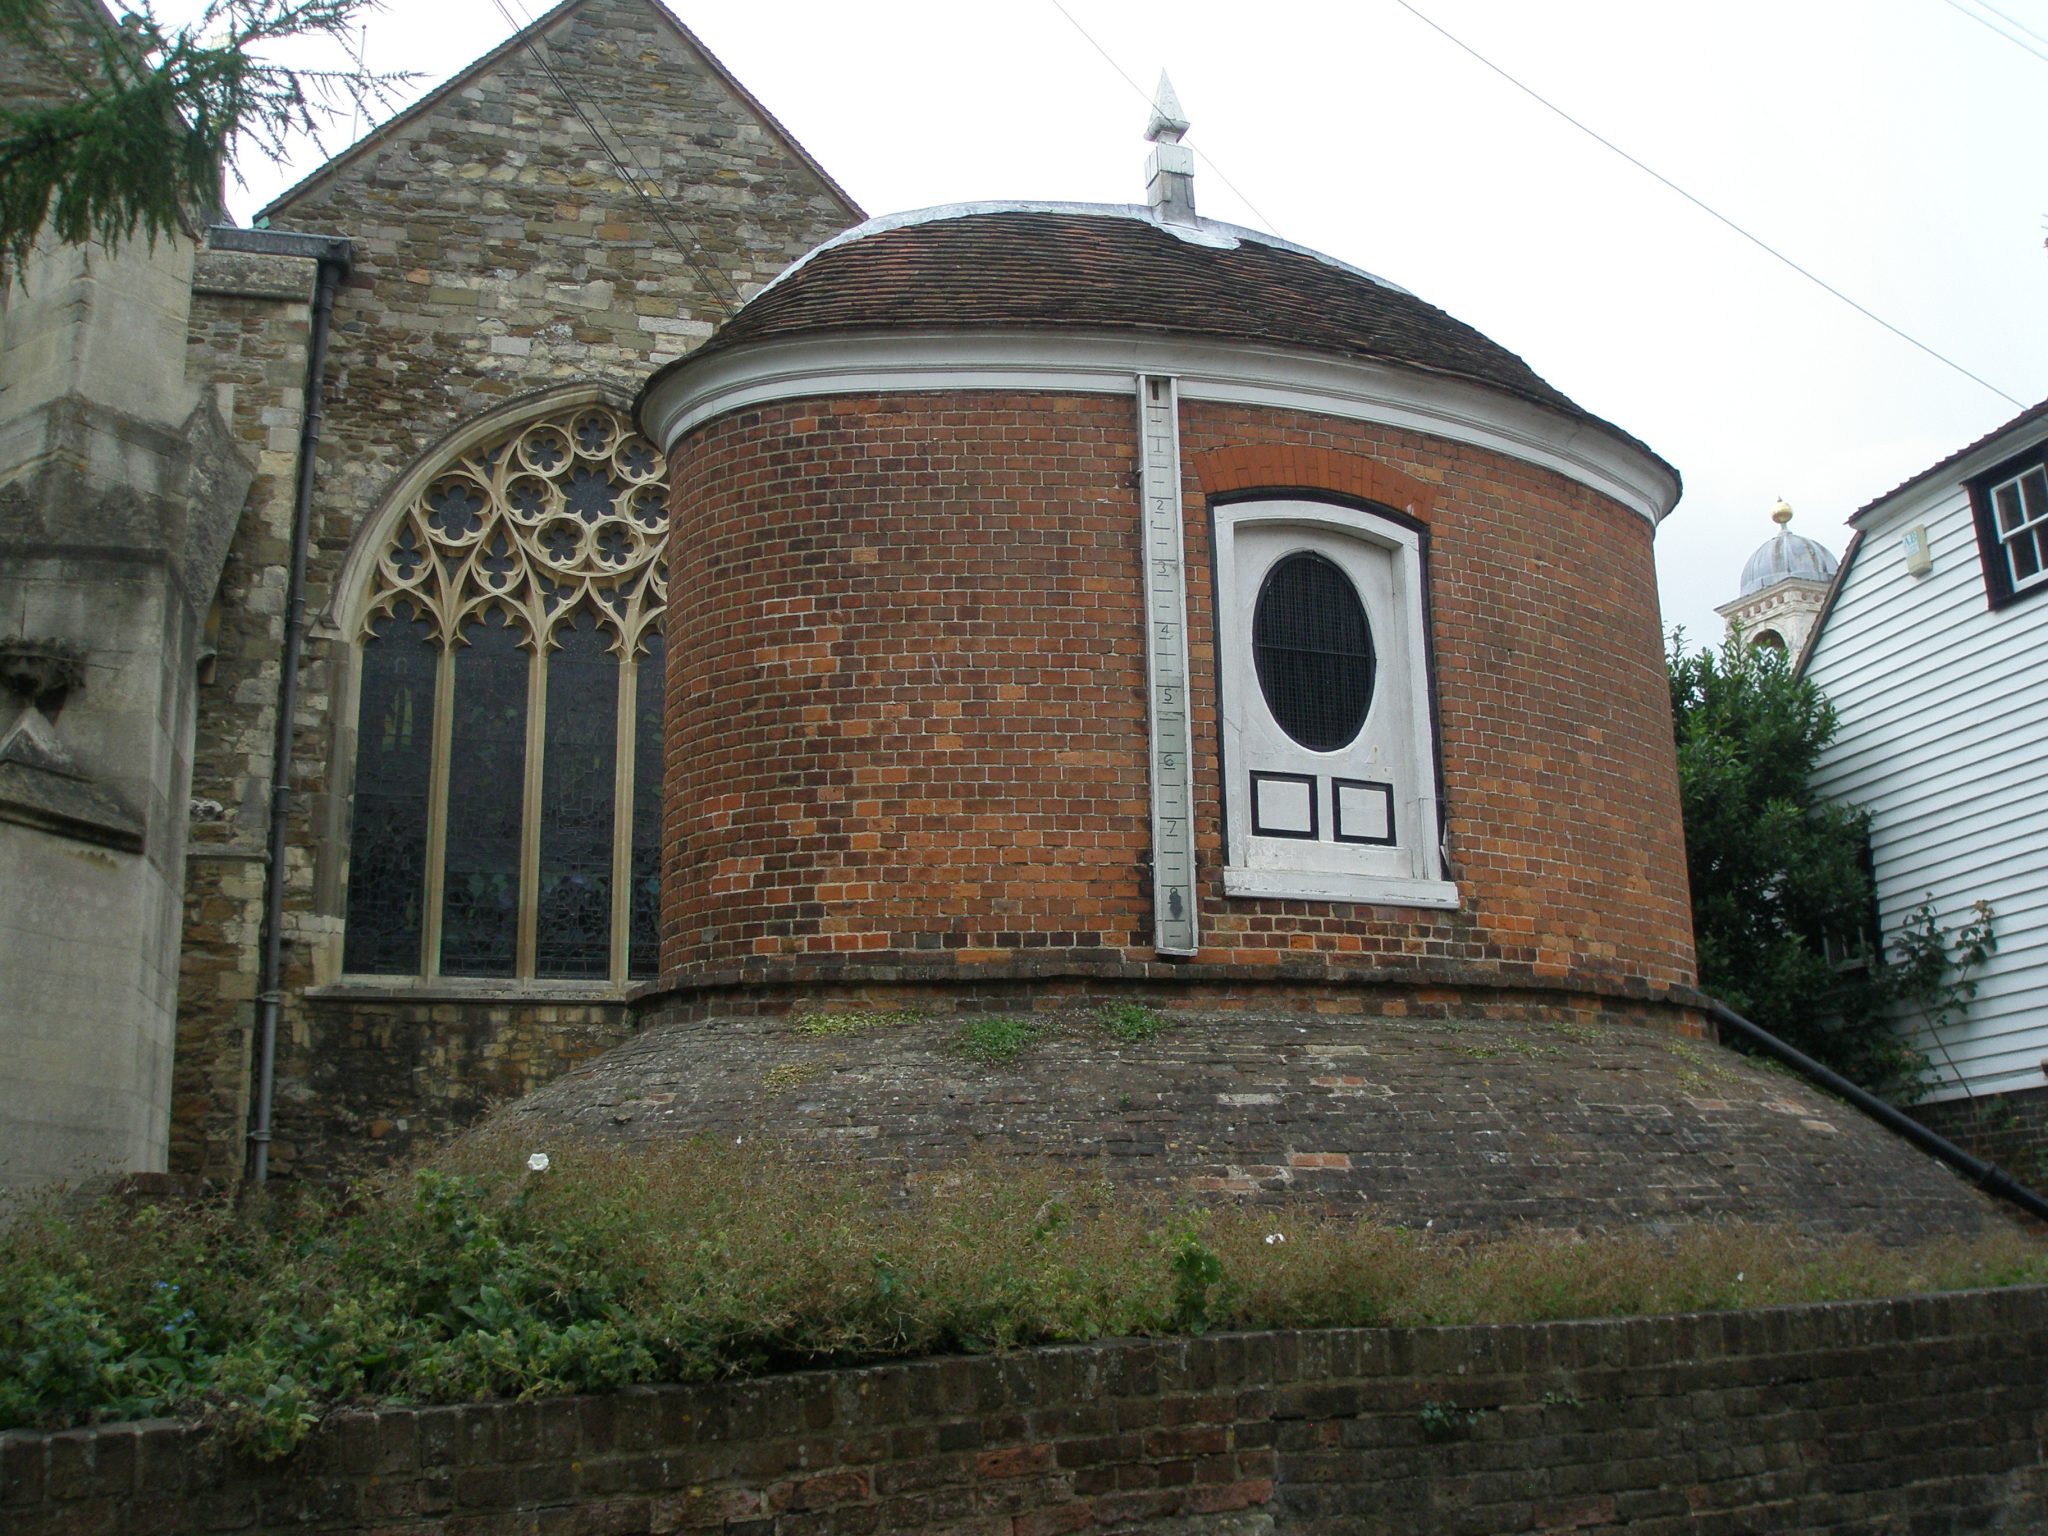 Adjacent to the Church of St.Mary the Virgin is the Water House (or Cistern), which was constructed in 1735.